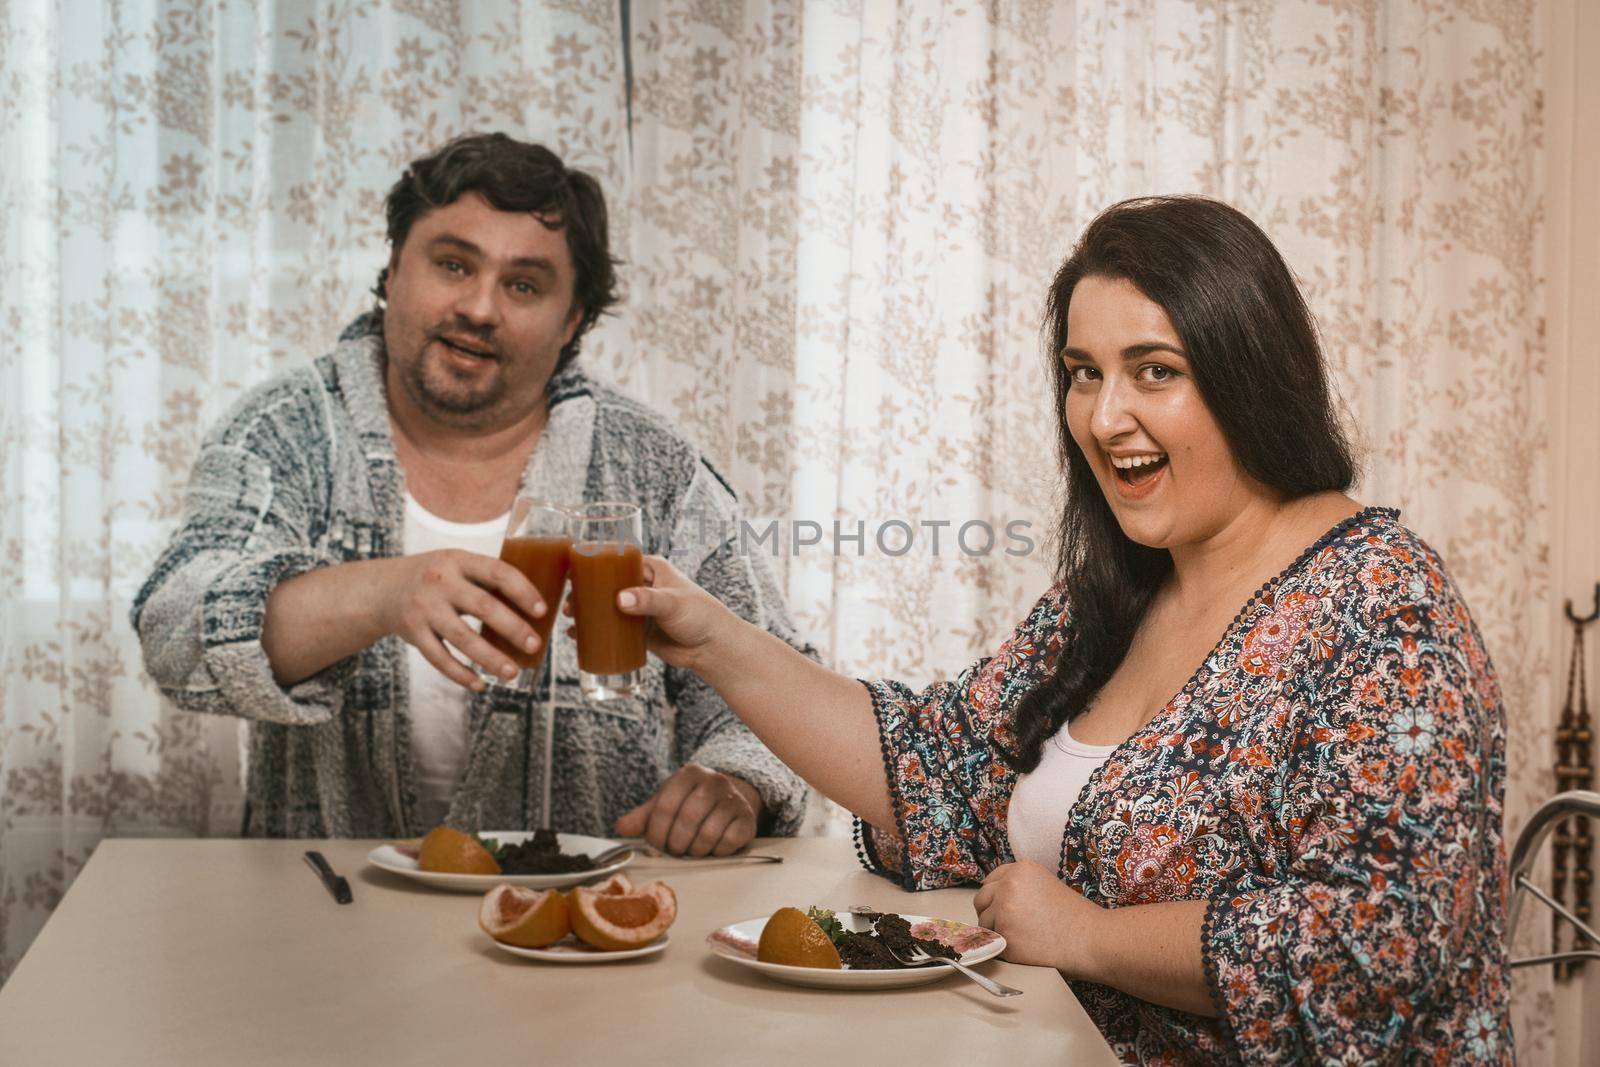 Body Positive Couple Clinking Glasses Of Juice While Sitting At Table With Wholesome Food, Plus Size Husband And Wife Cheerfully Looking At Camera While Sitting In Domestic Kitchen